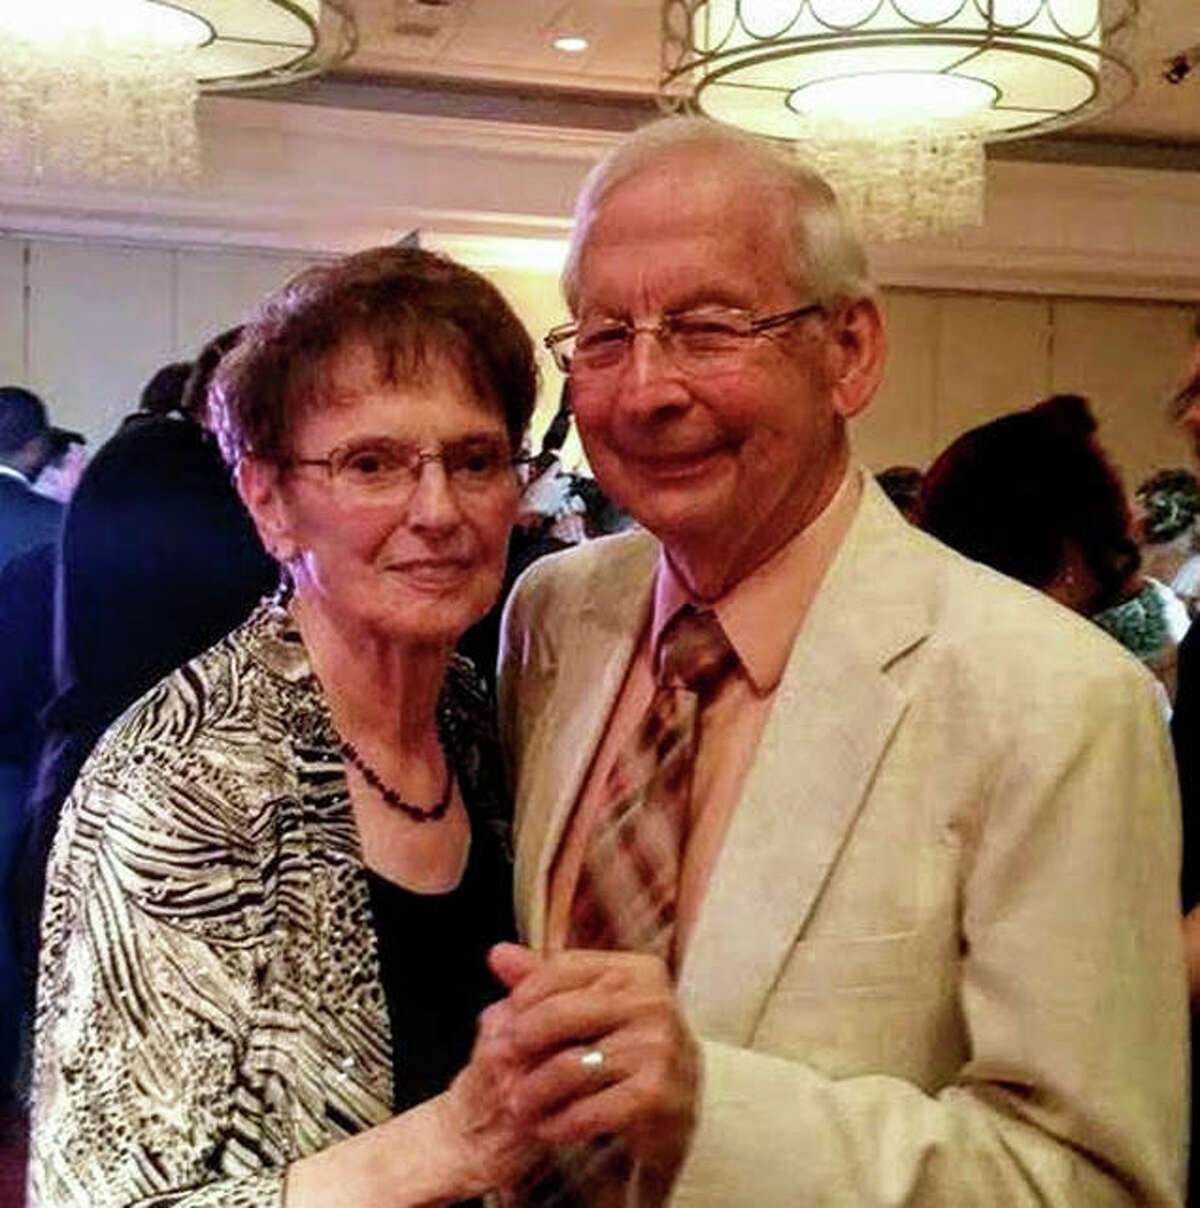 Ken and Jean Conrady will be honored at the Alton Symphony Orchestra’s concert on Saturday, Oct. 27.